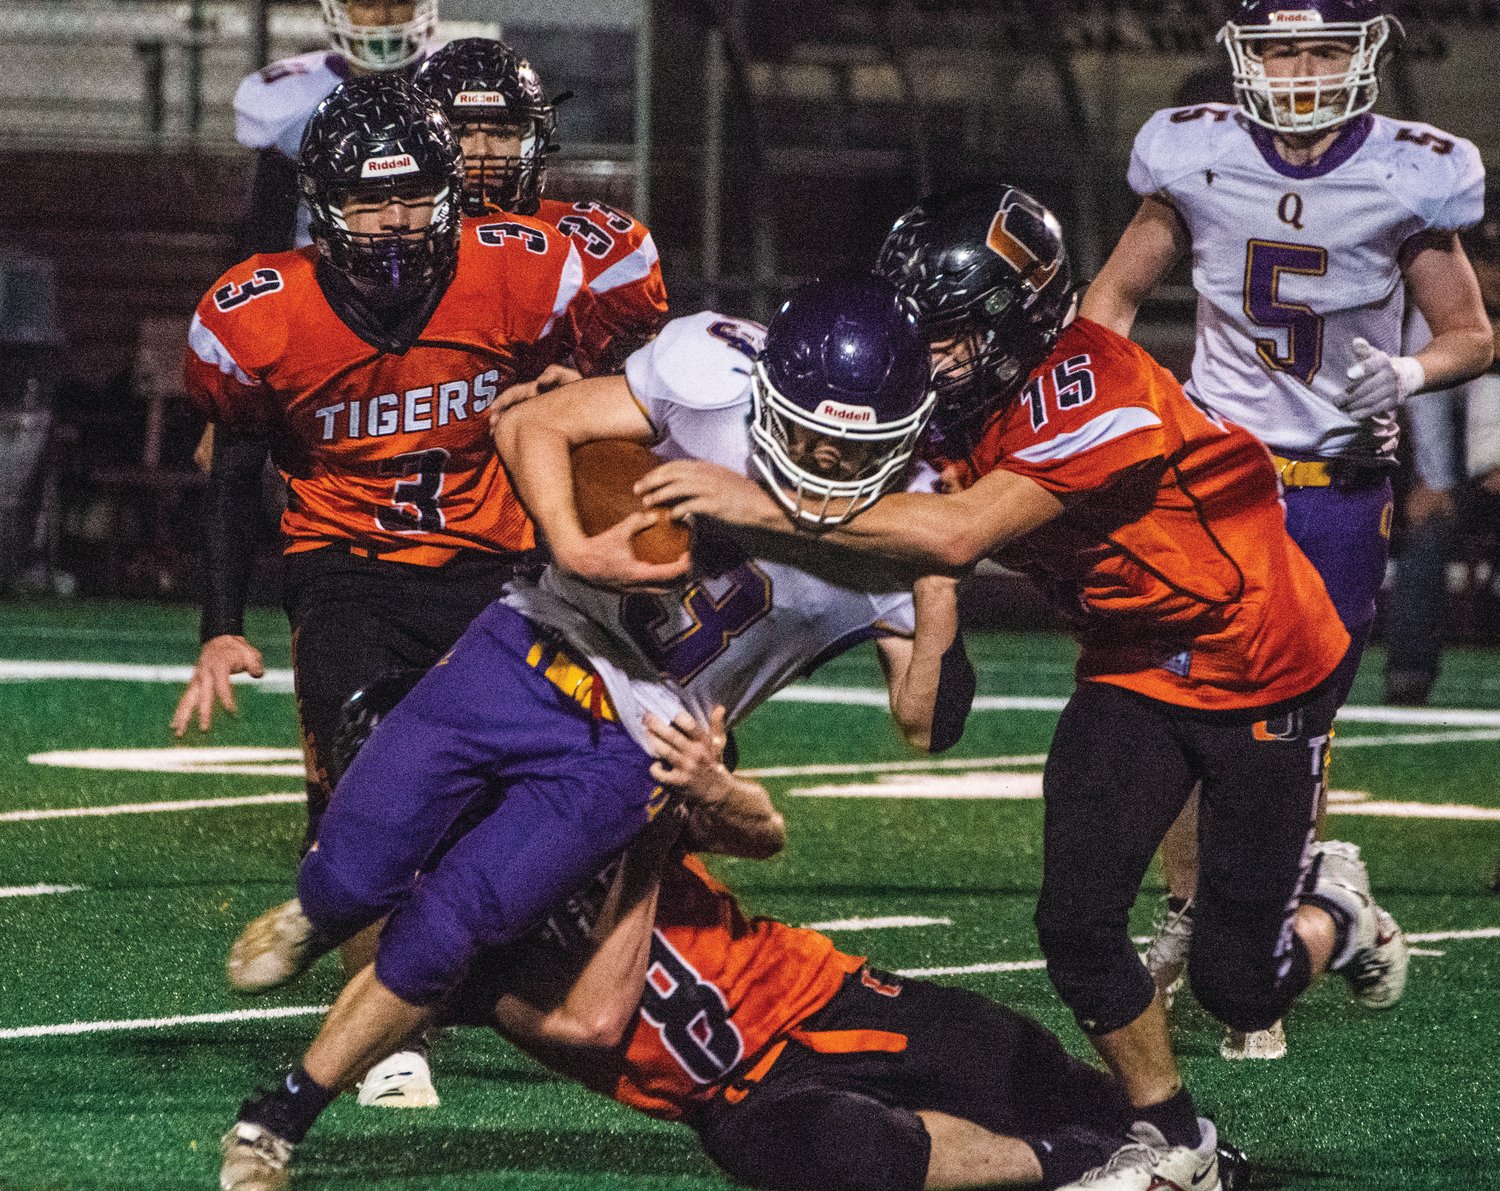 At left, it takes a village — to tackle the Rangers’ Bishop Budnek, as the Odessa Tigers learn during Saturday’s game in Moses Lake.